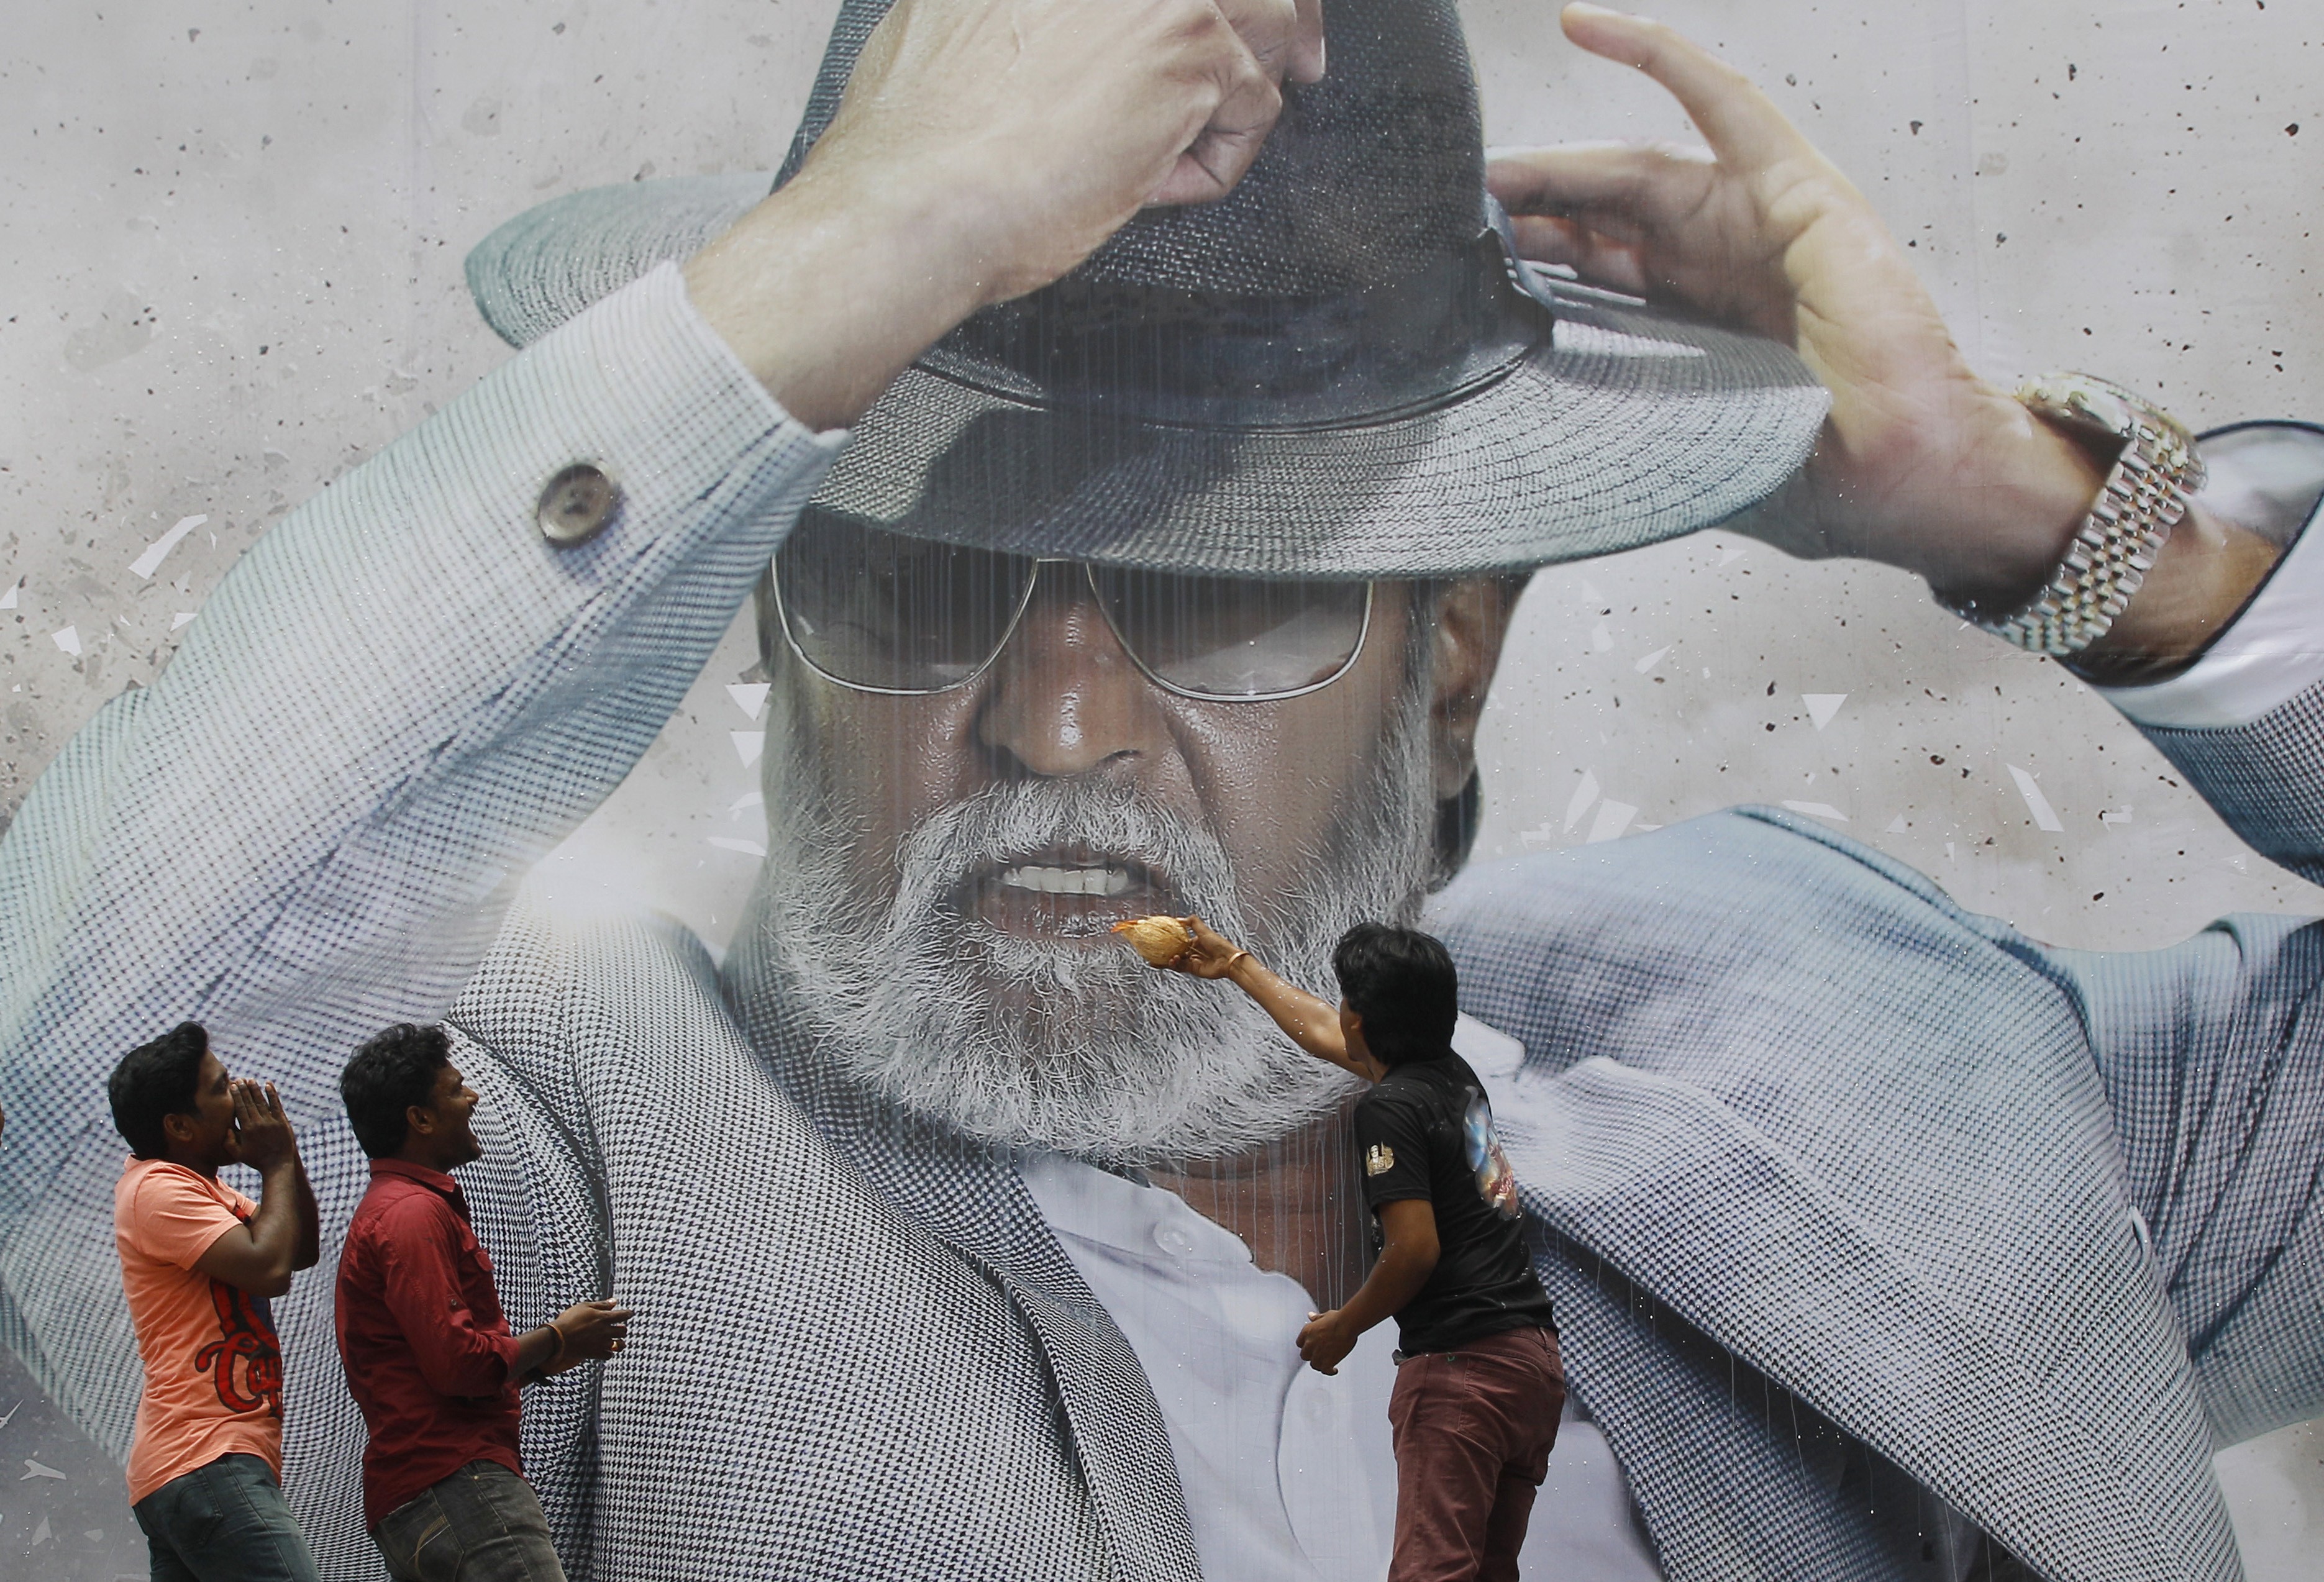 Worshipped like a god in India, Rajinikanth scored an unlikely breakthrough with ‘Muthu’ – which filled Tokyo cinemas, ran for 23 weeks and grossed US$1.6m